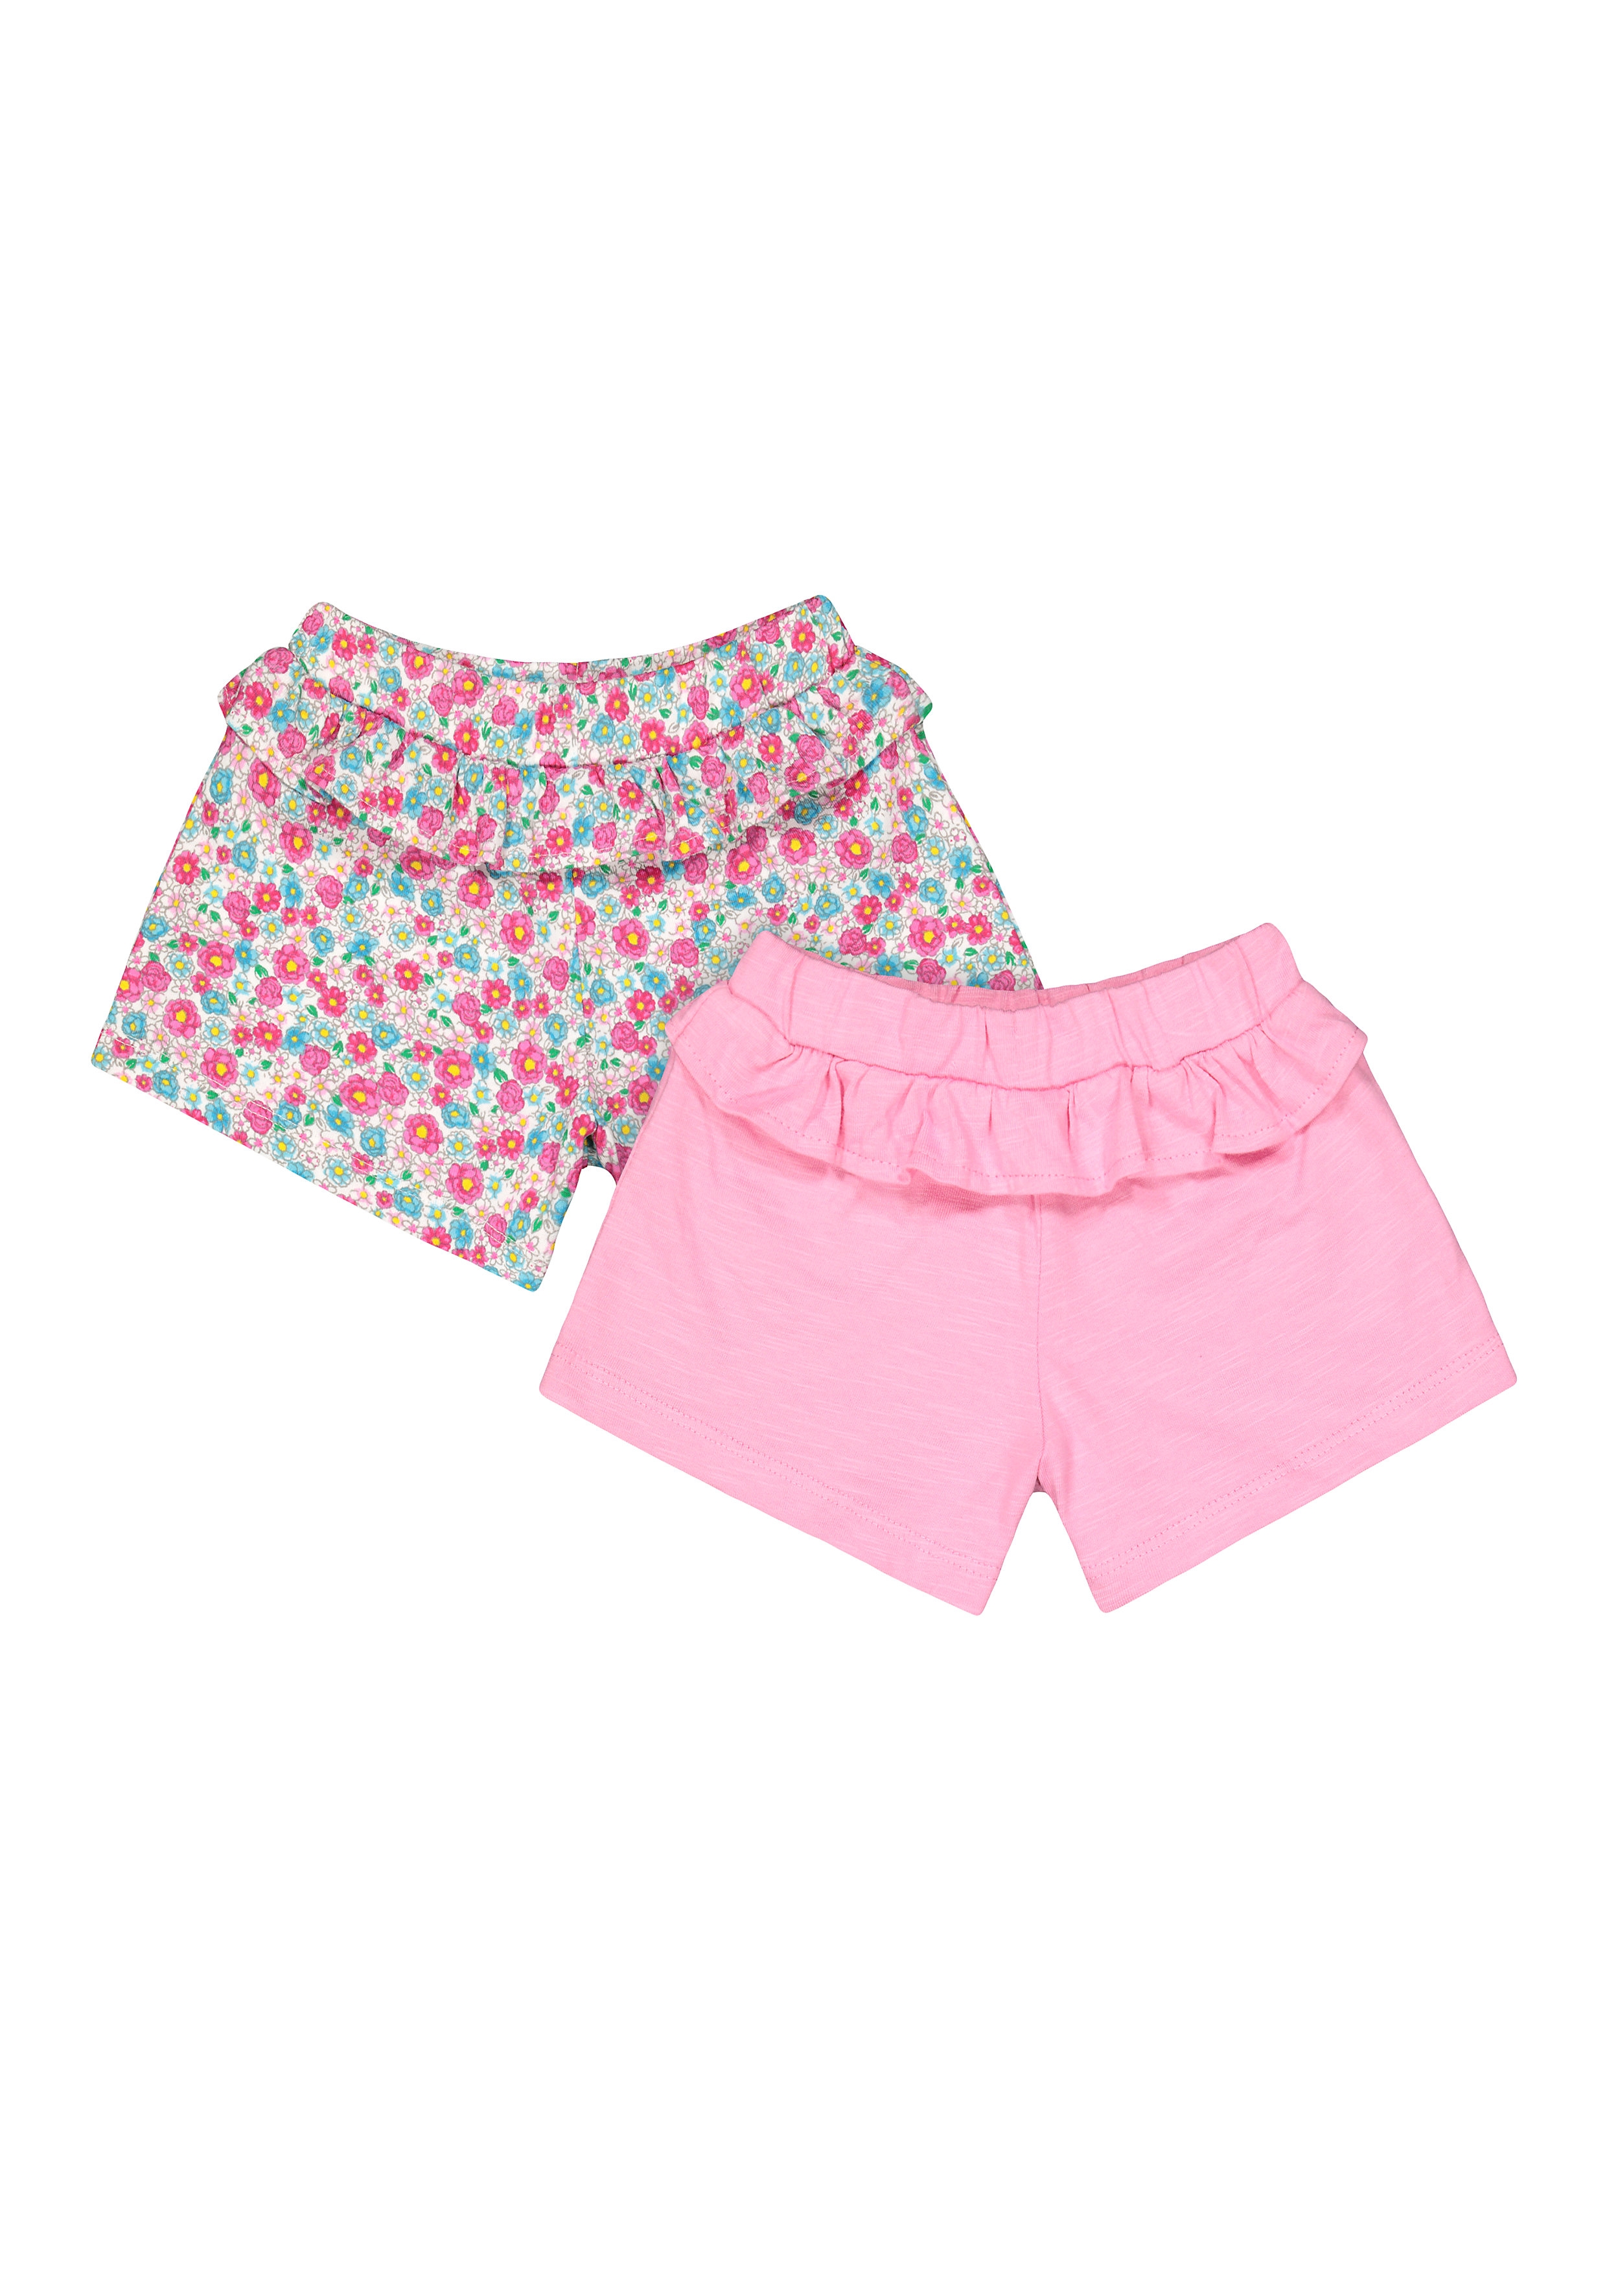 Mothercare | Pink and Floral Shorts - 2 Pack